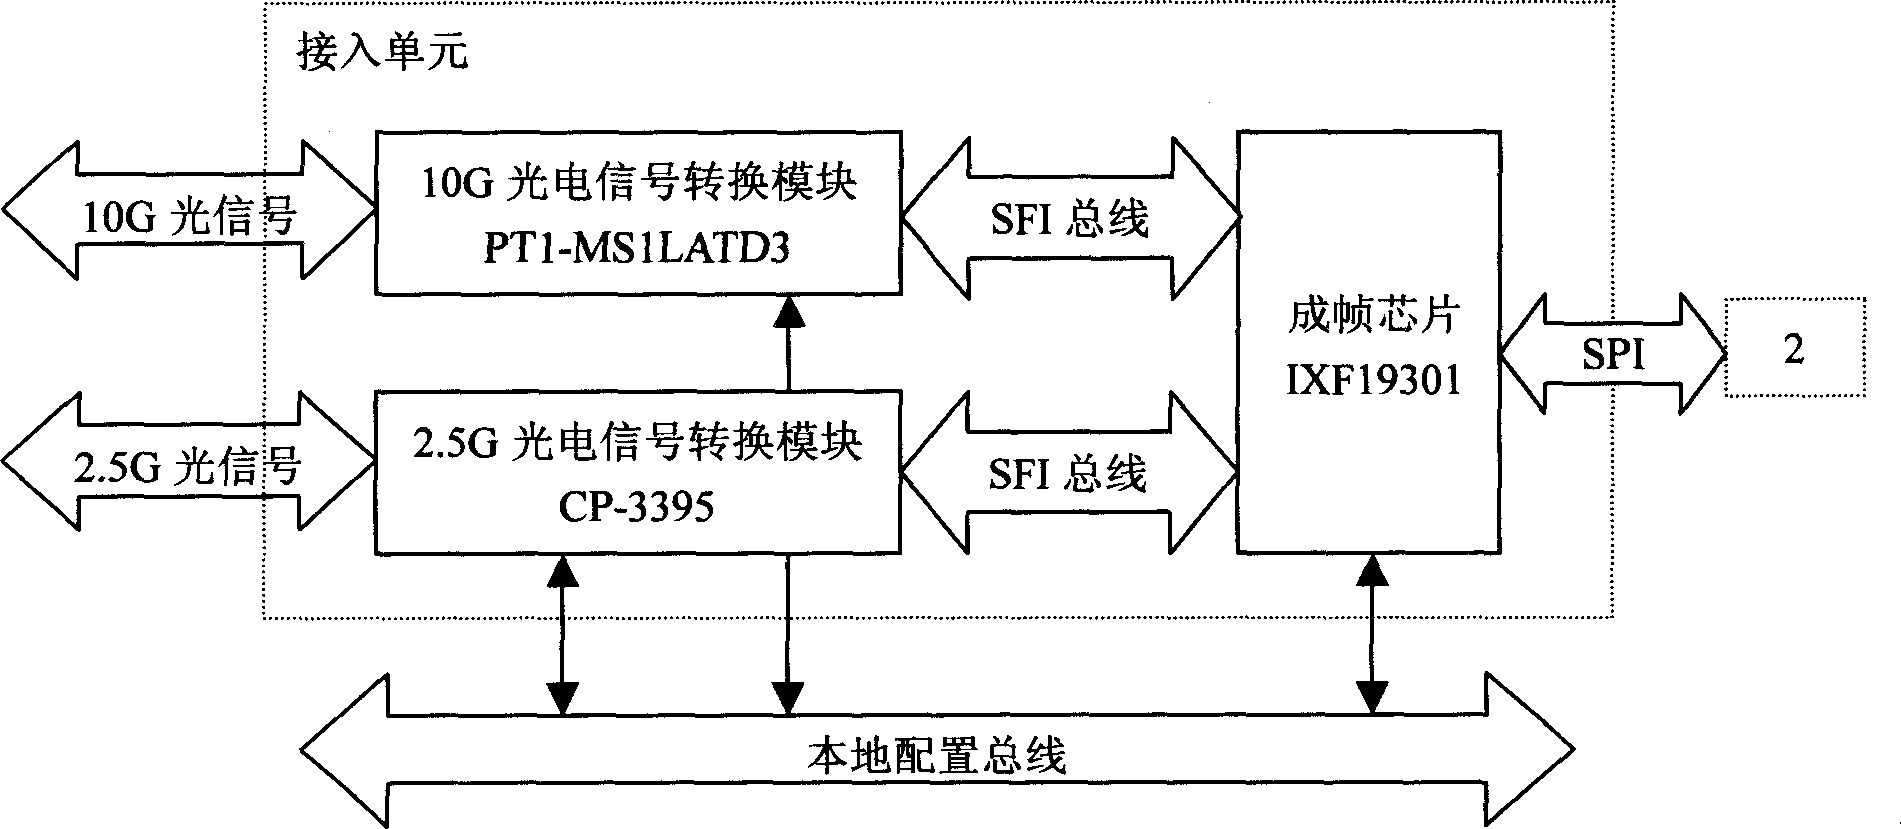 Safety filtering current shunt of exchange structure based on network processor and CPU array